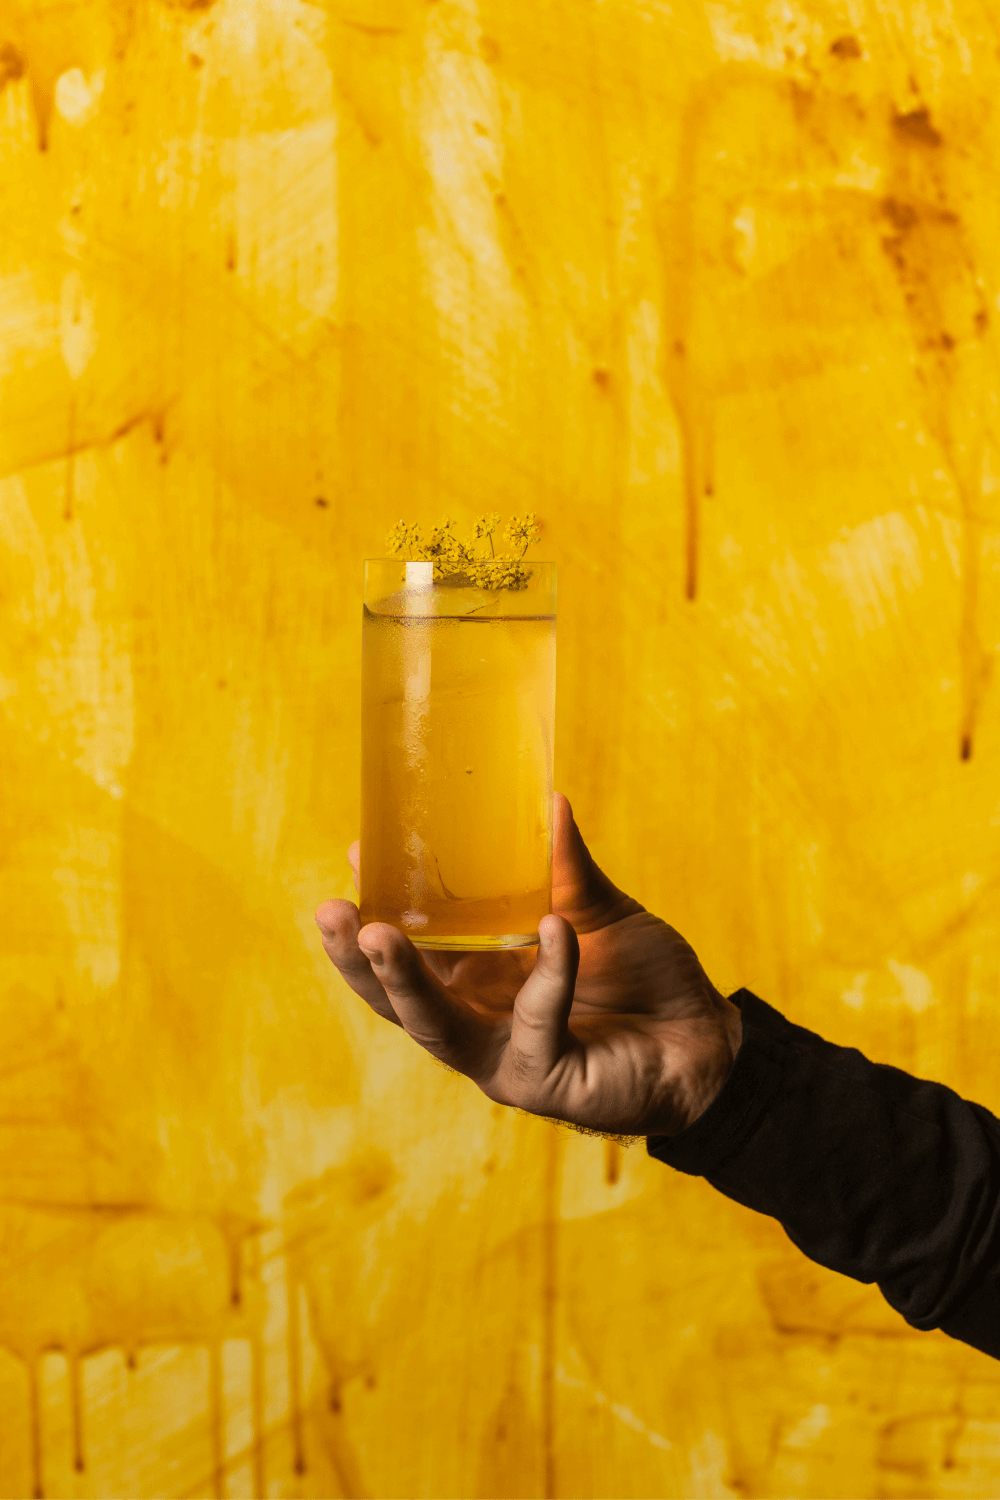 A hand holding a high ball cocktail in front of a yellow wall